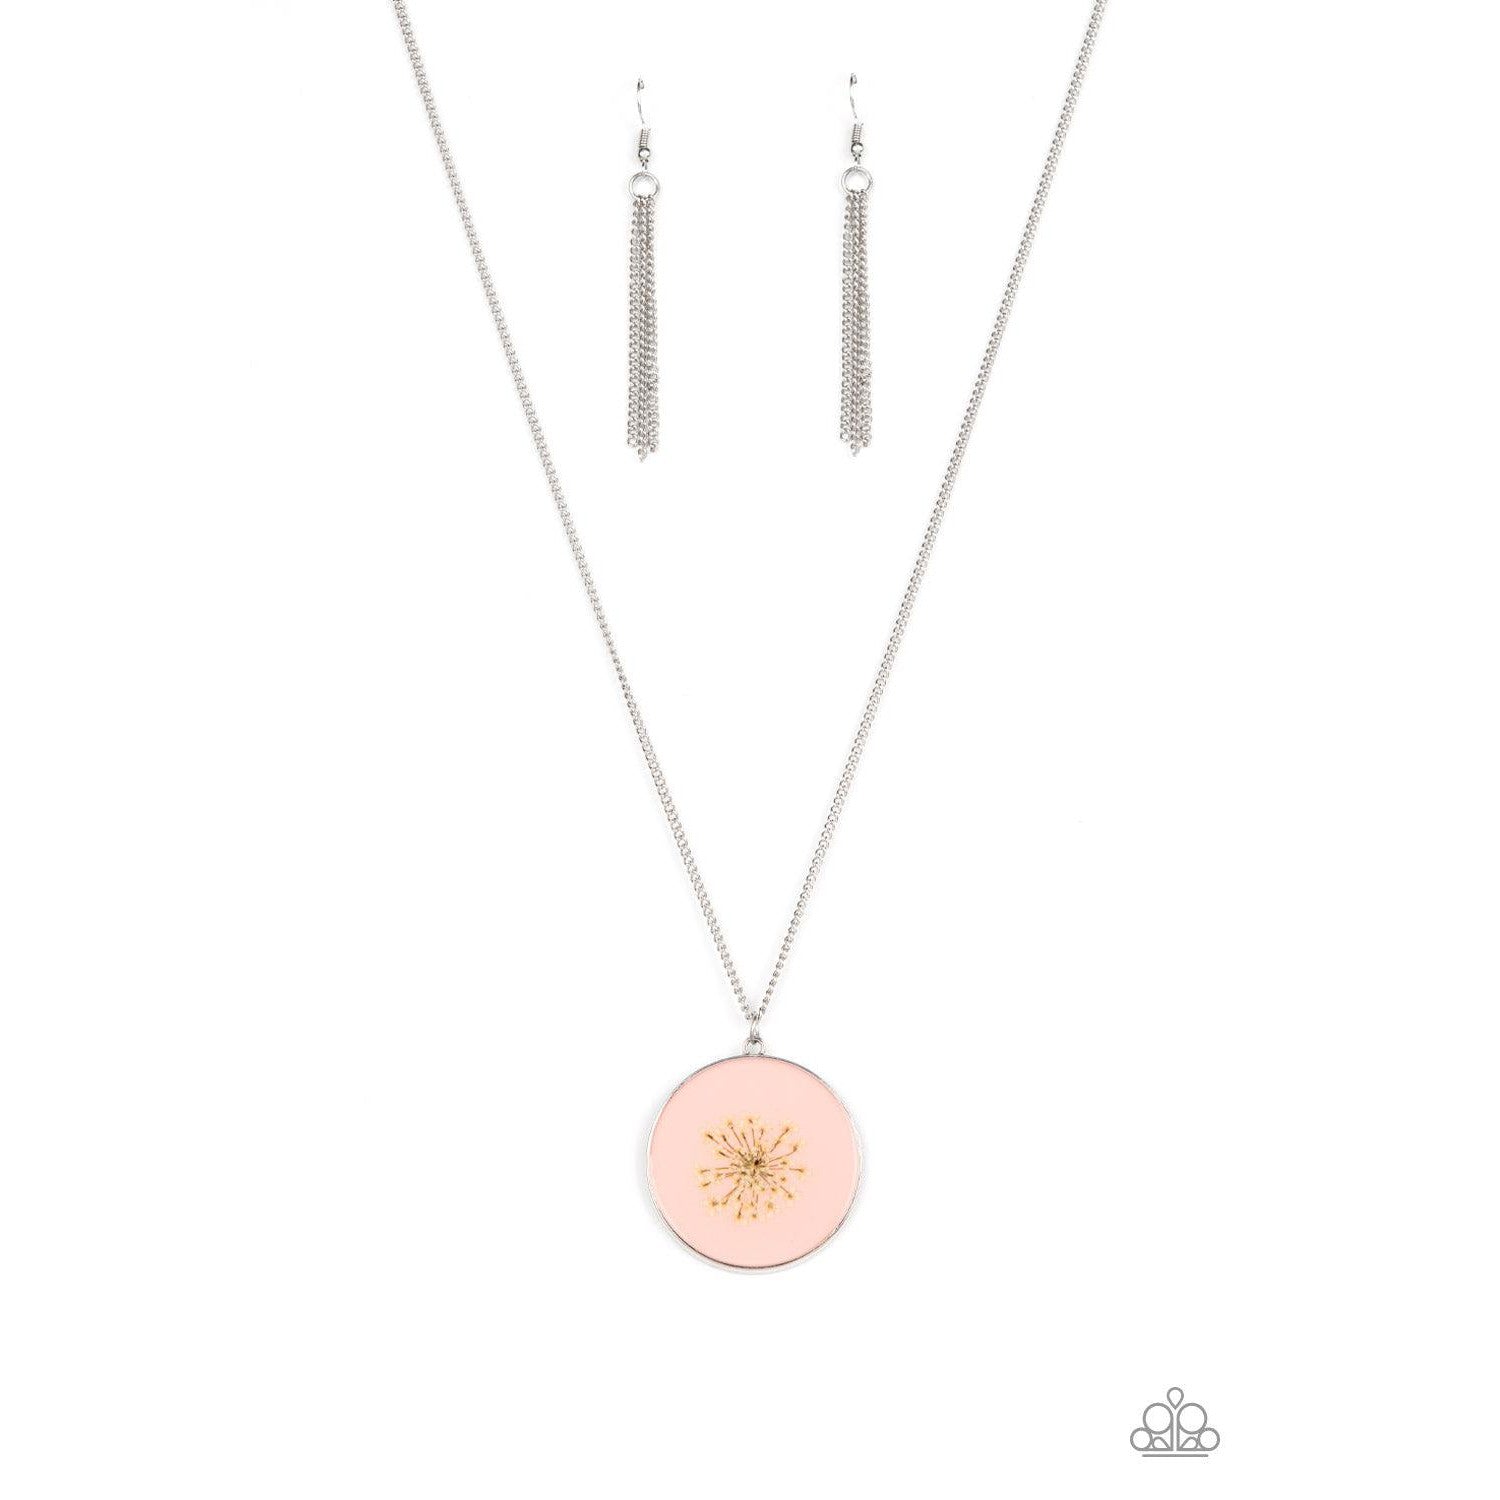 Prairie Picnic - Pink Coral Flower Necklace - A Large Selection Hand-Chains And Jewelry On rainbowartsreview,Women's Jewelry | Necklaces, Earrings, Bracelets